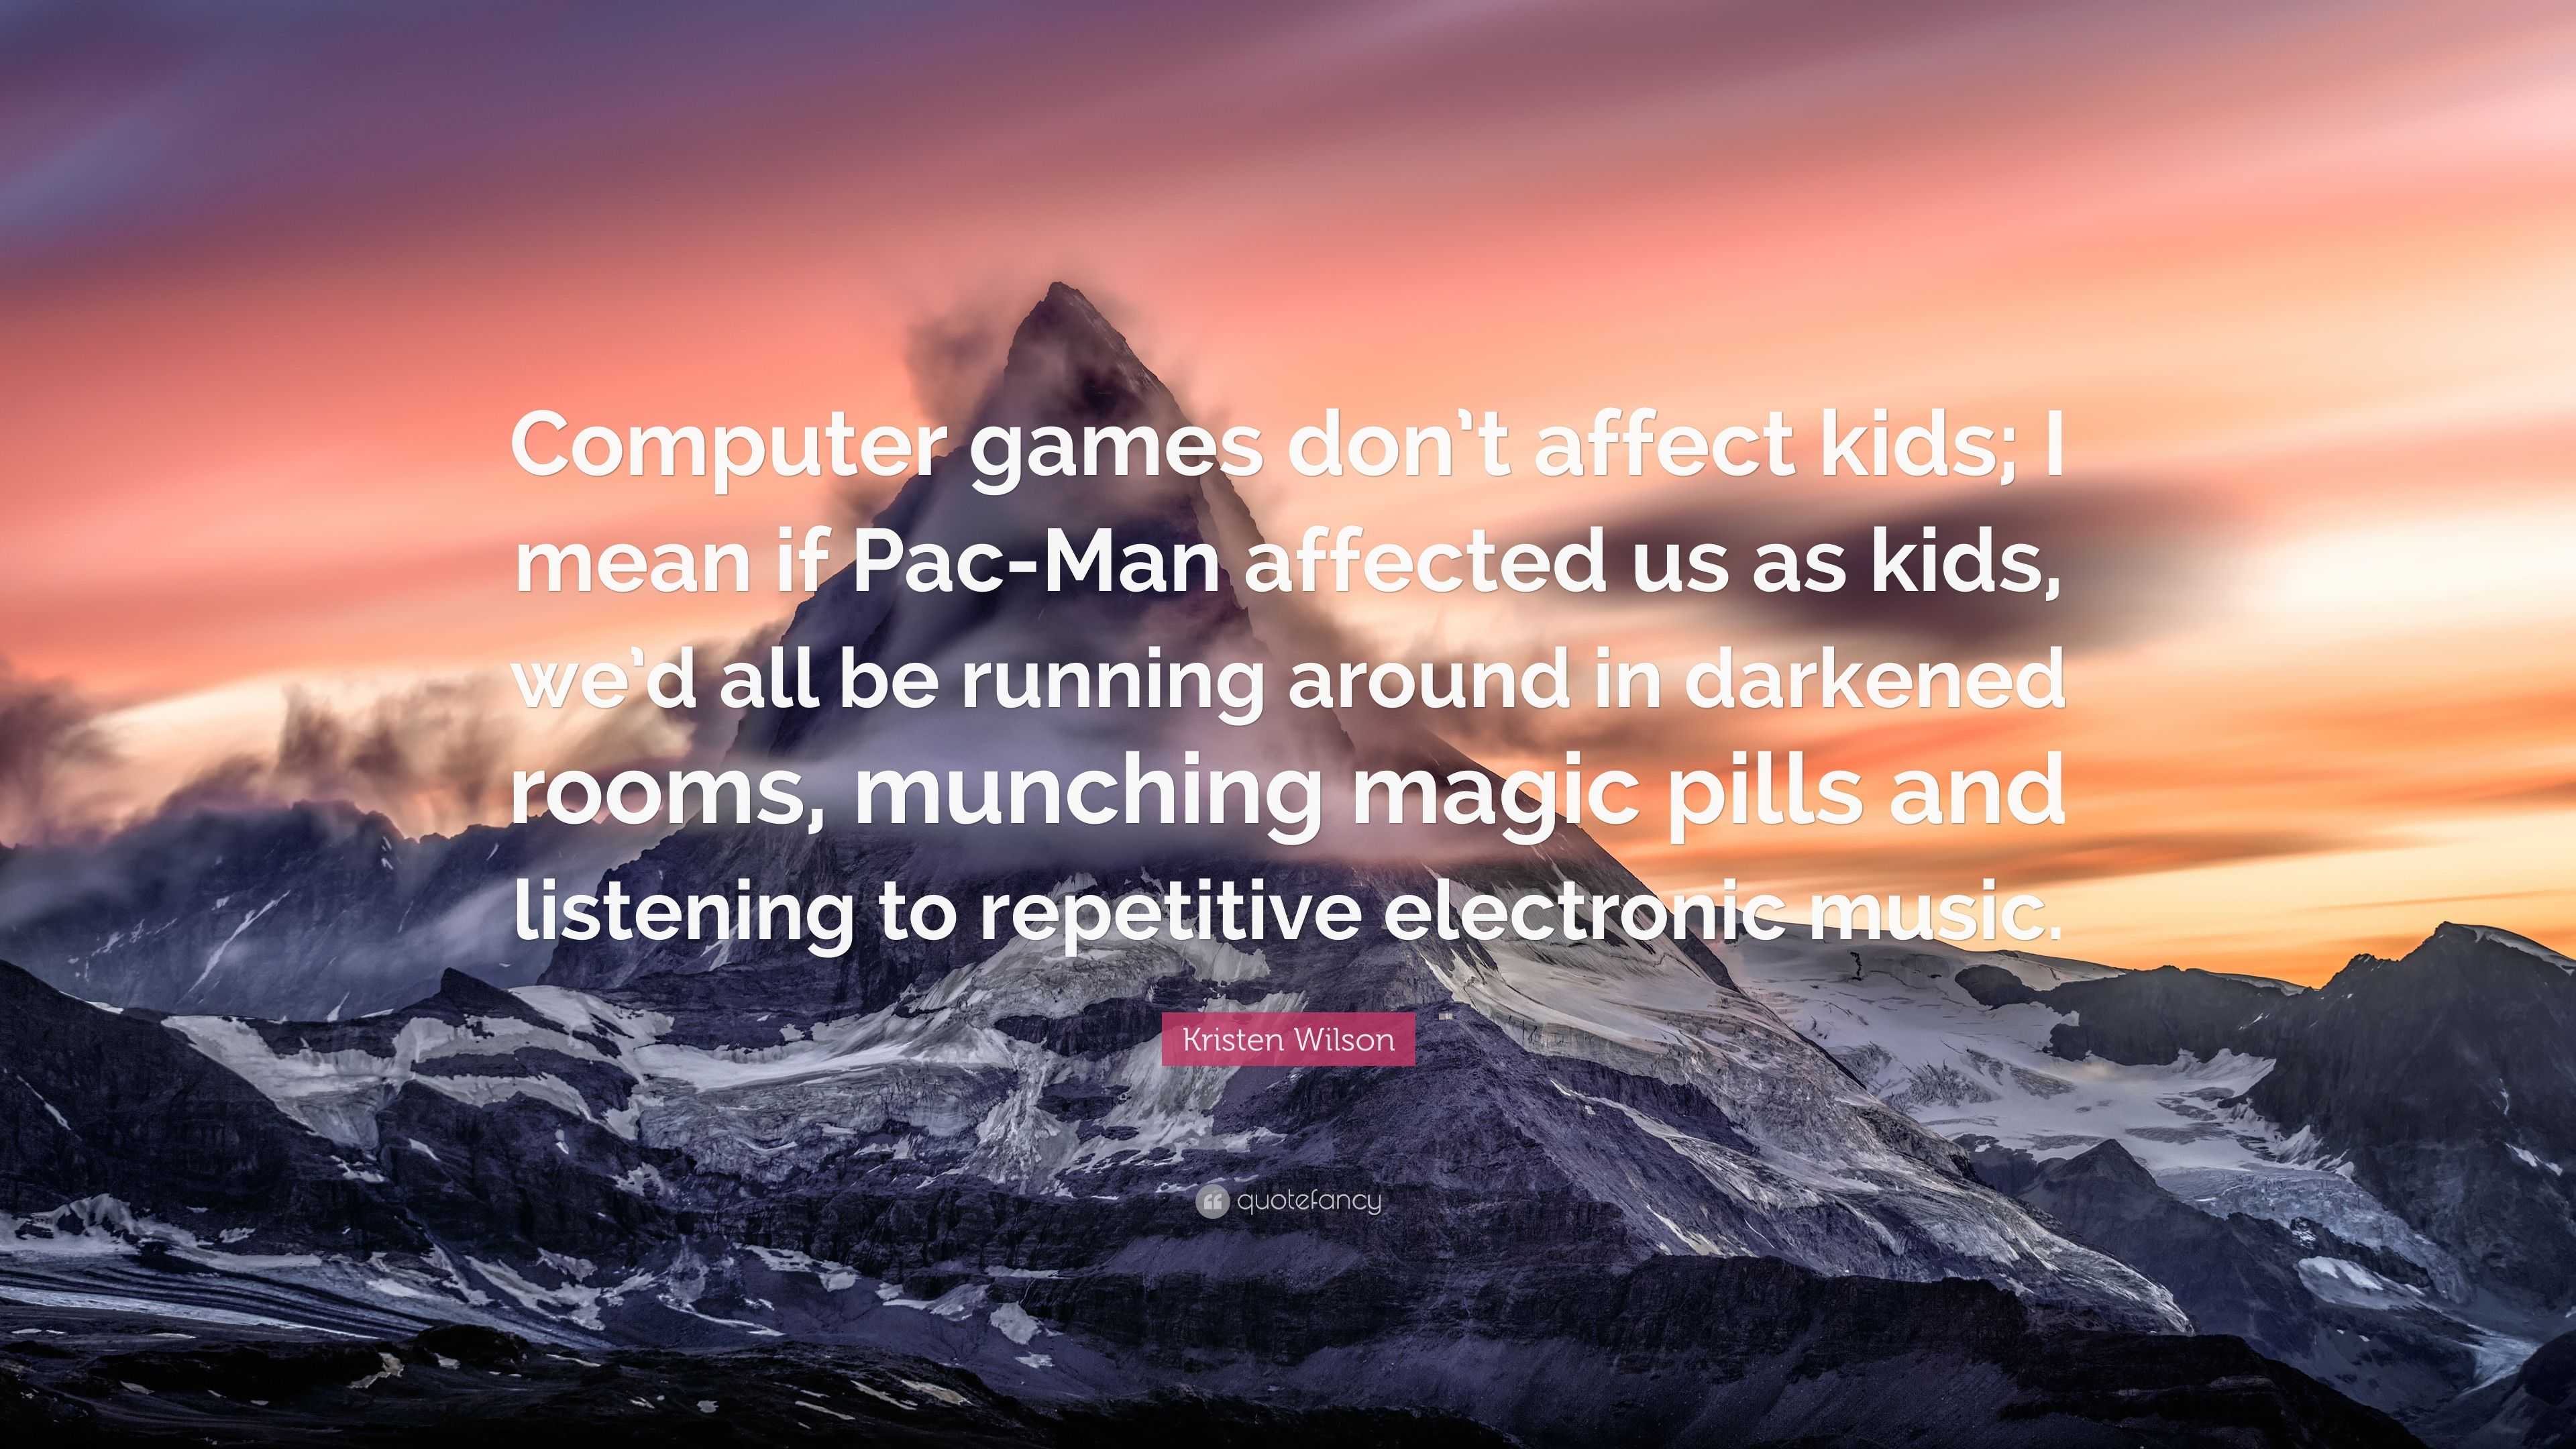 Computer games don't affect kids, i mean if pac-man affected us as kids,  we'd all be running around in darkened rooms munching magic pills and